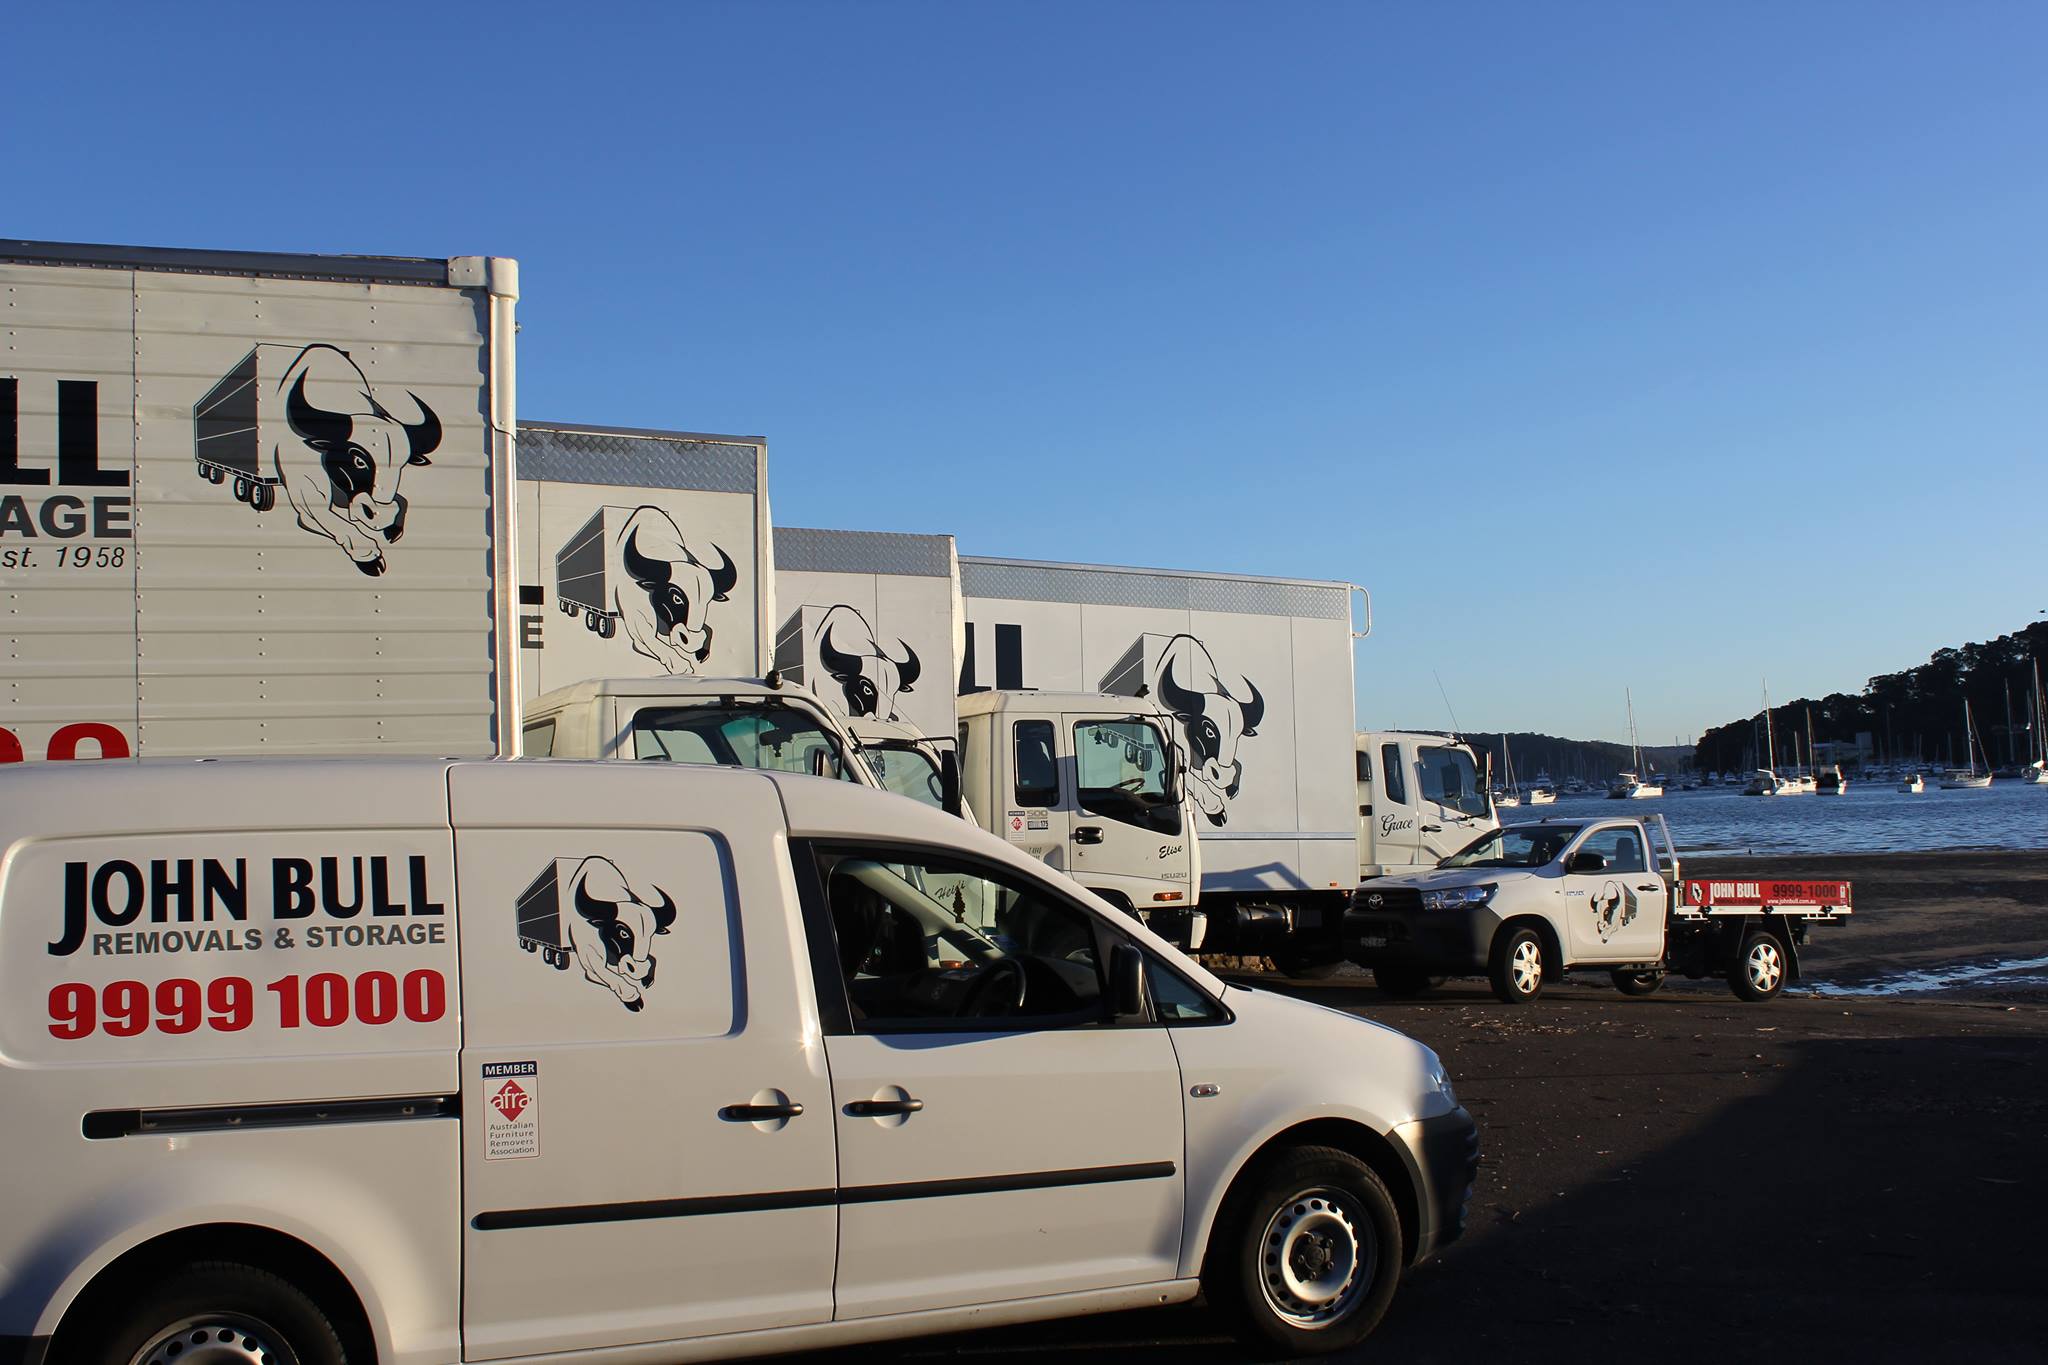 John Bull Removals & Storage Local Movers in Mona Vale